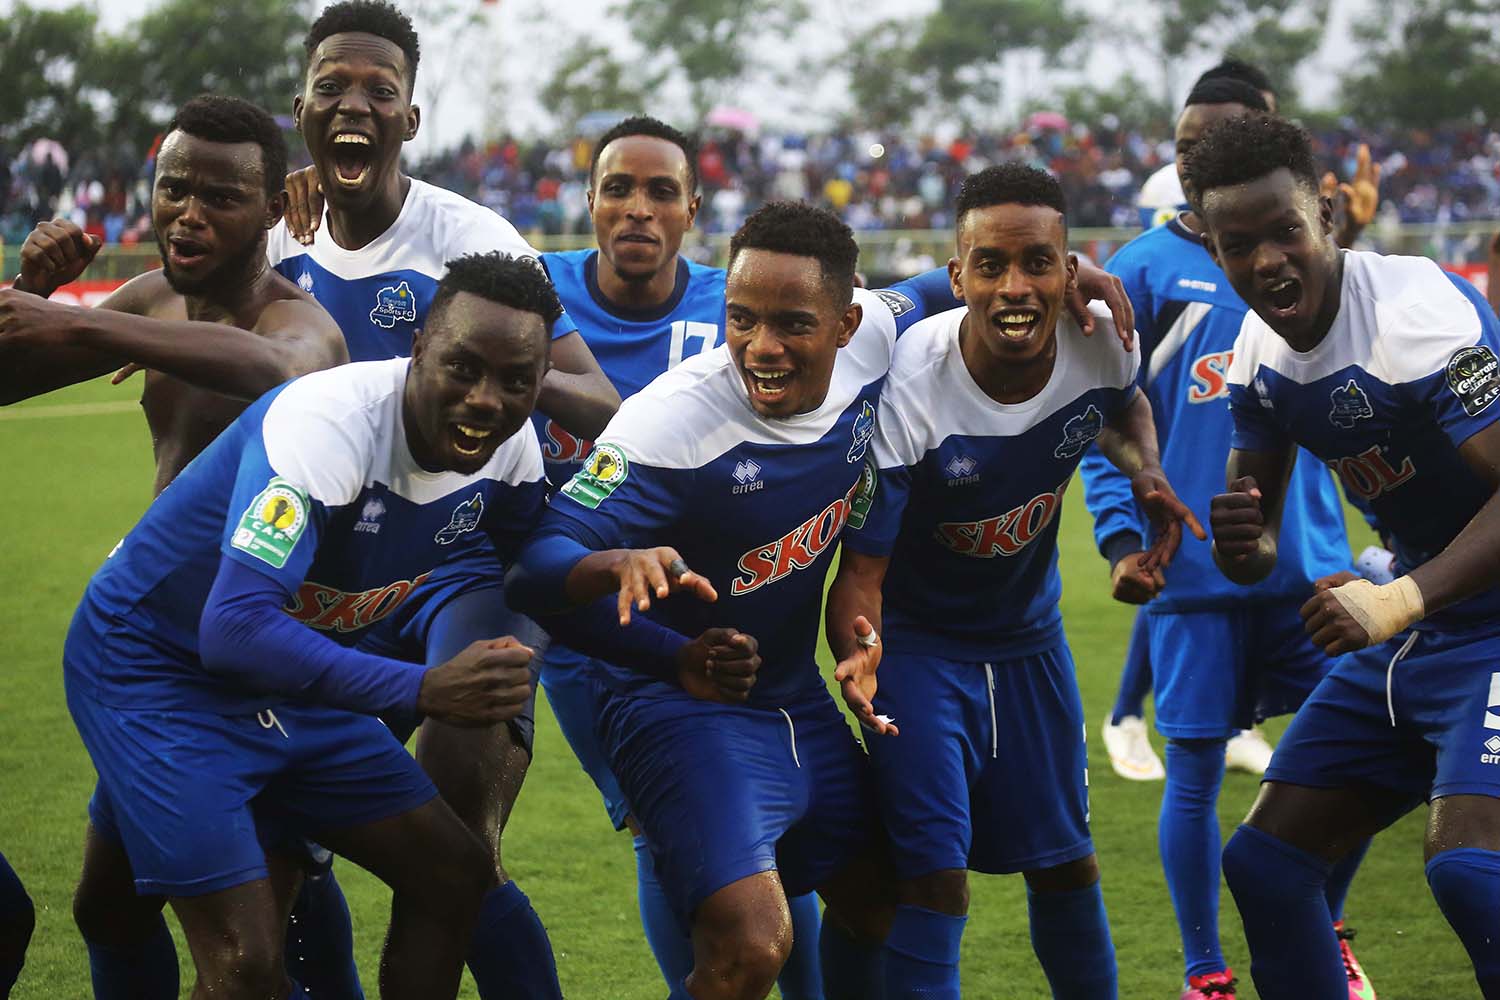 The Blues players celebrate their crucial victory at Kigali Stadium